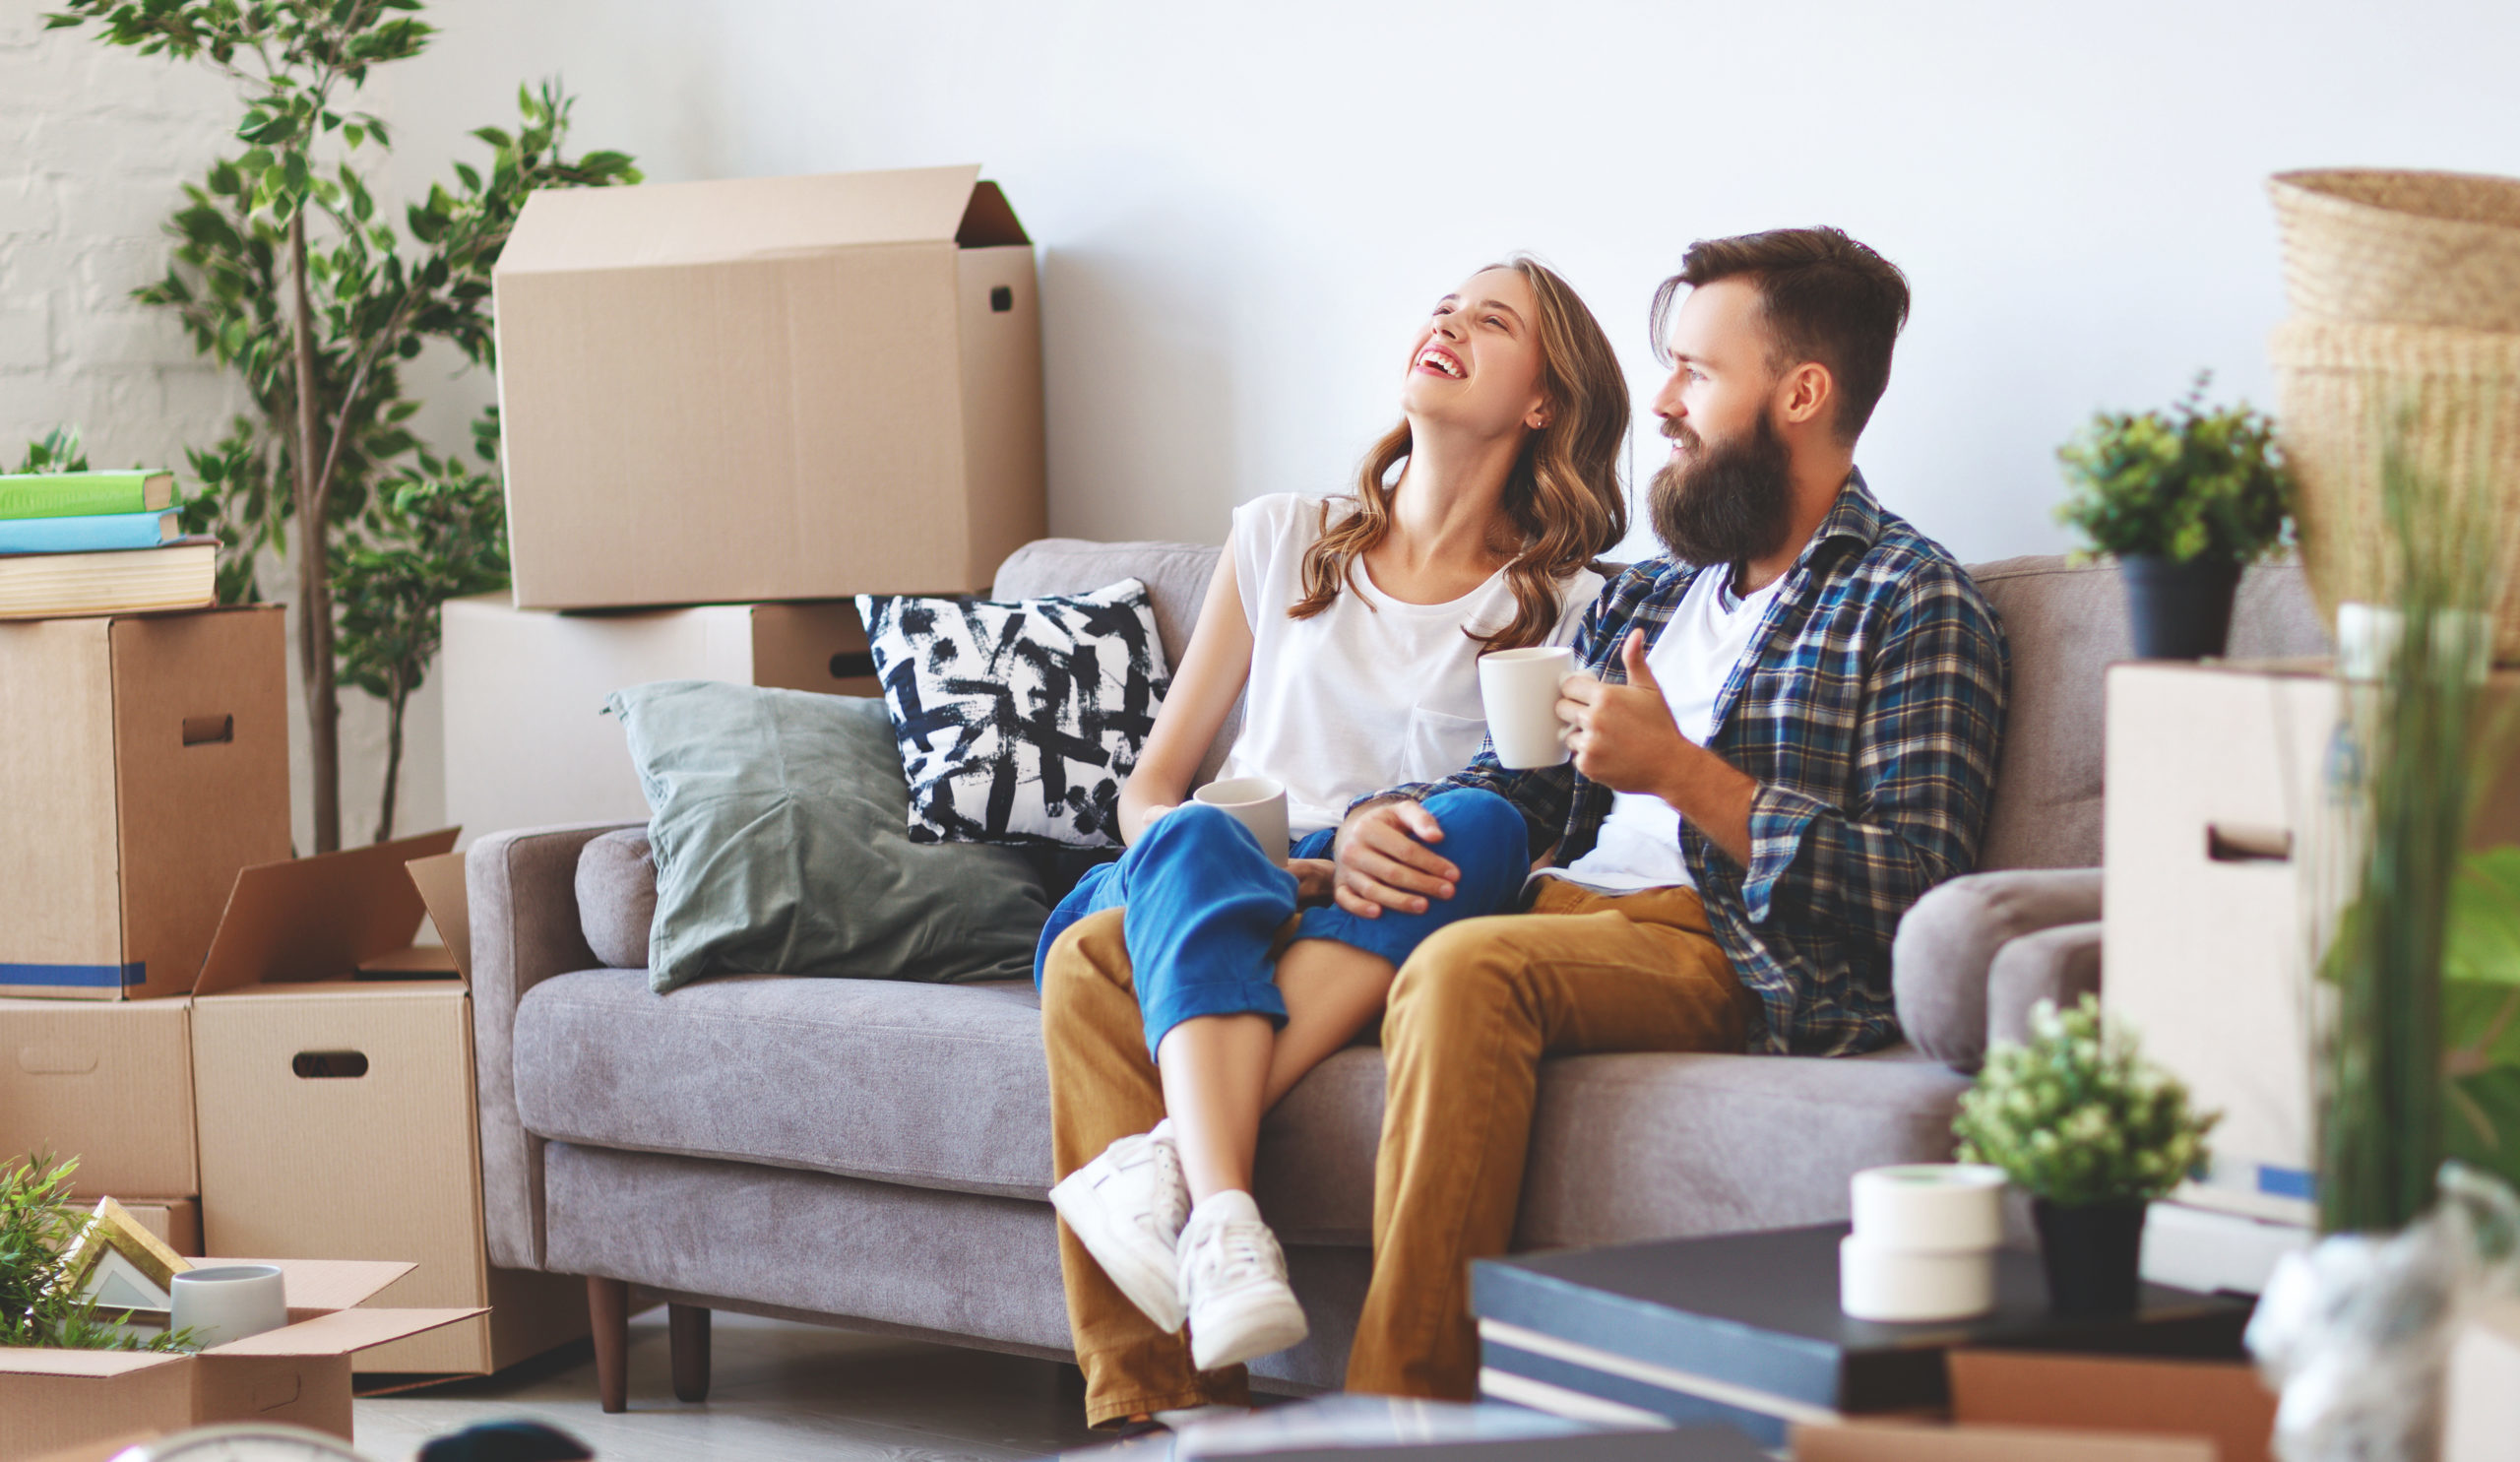 A happy young couple laughing on the couch in their first home surrounded by moving boxes